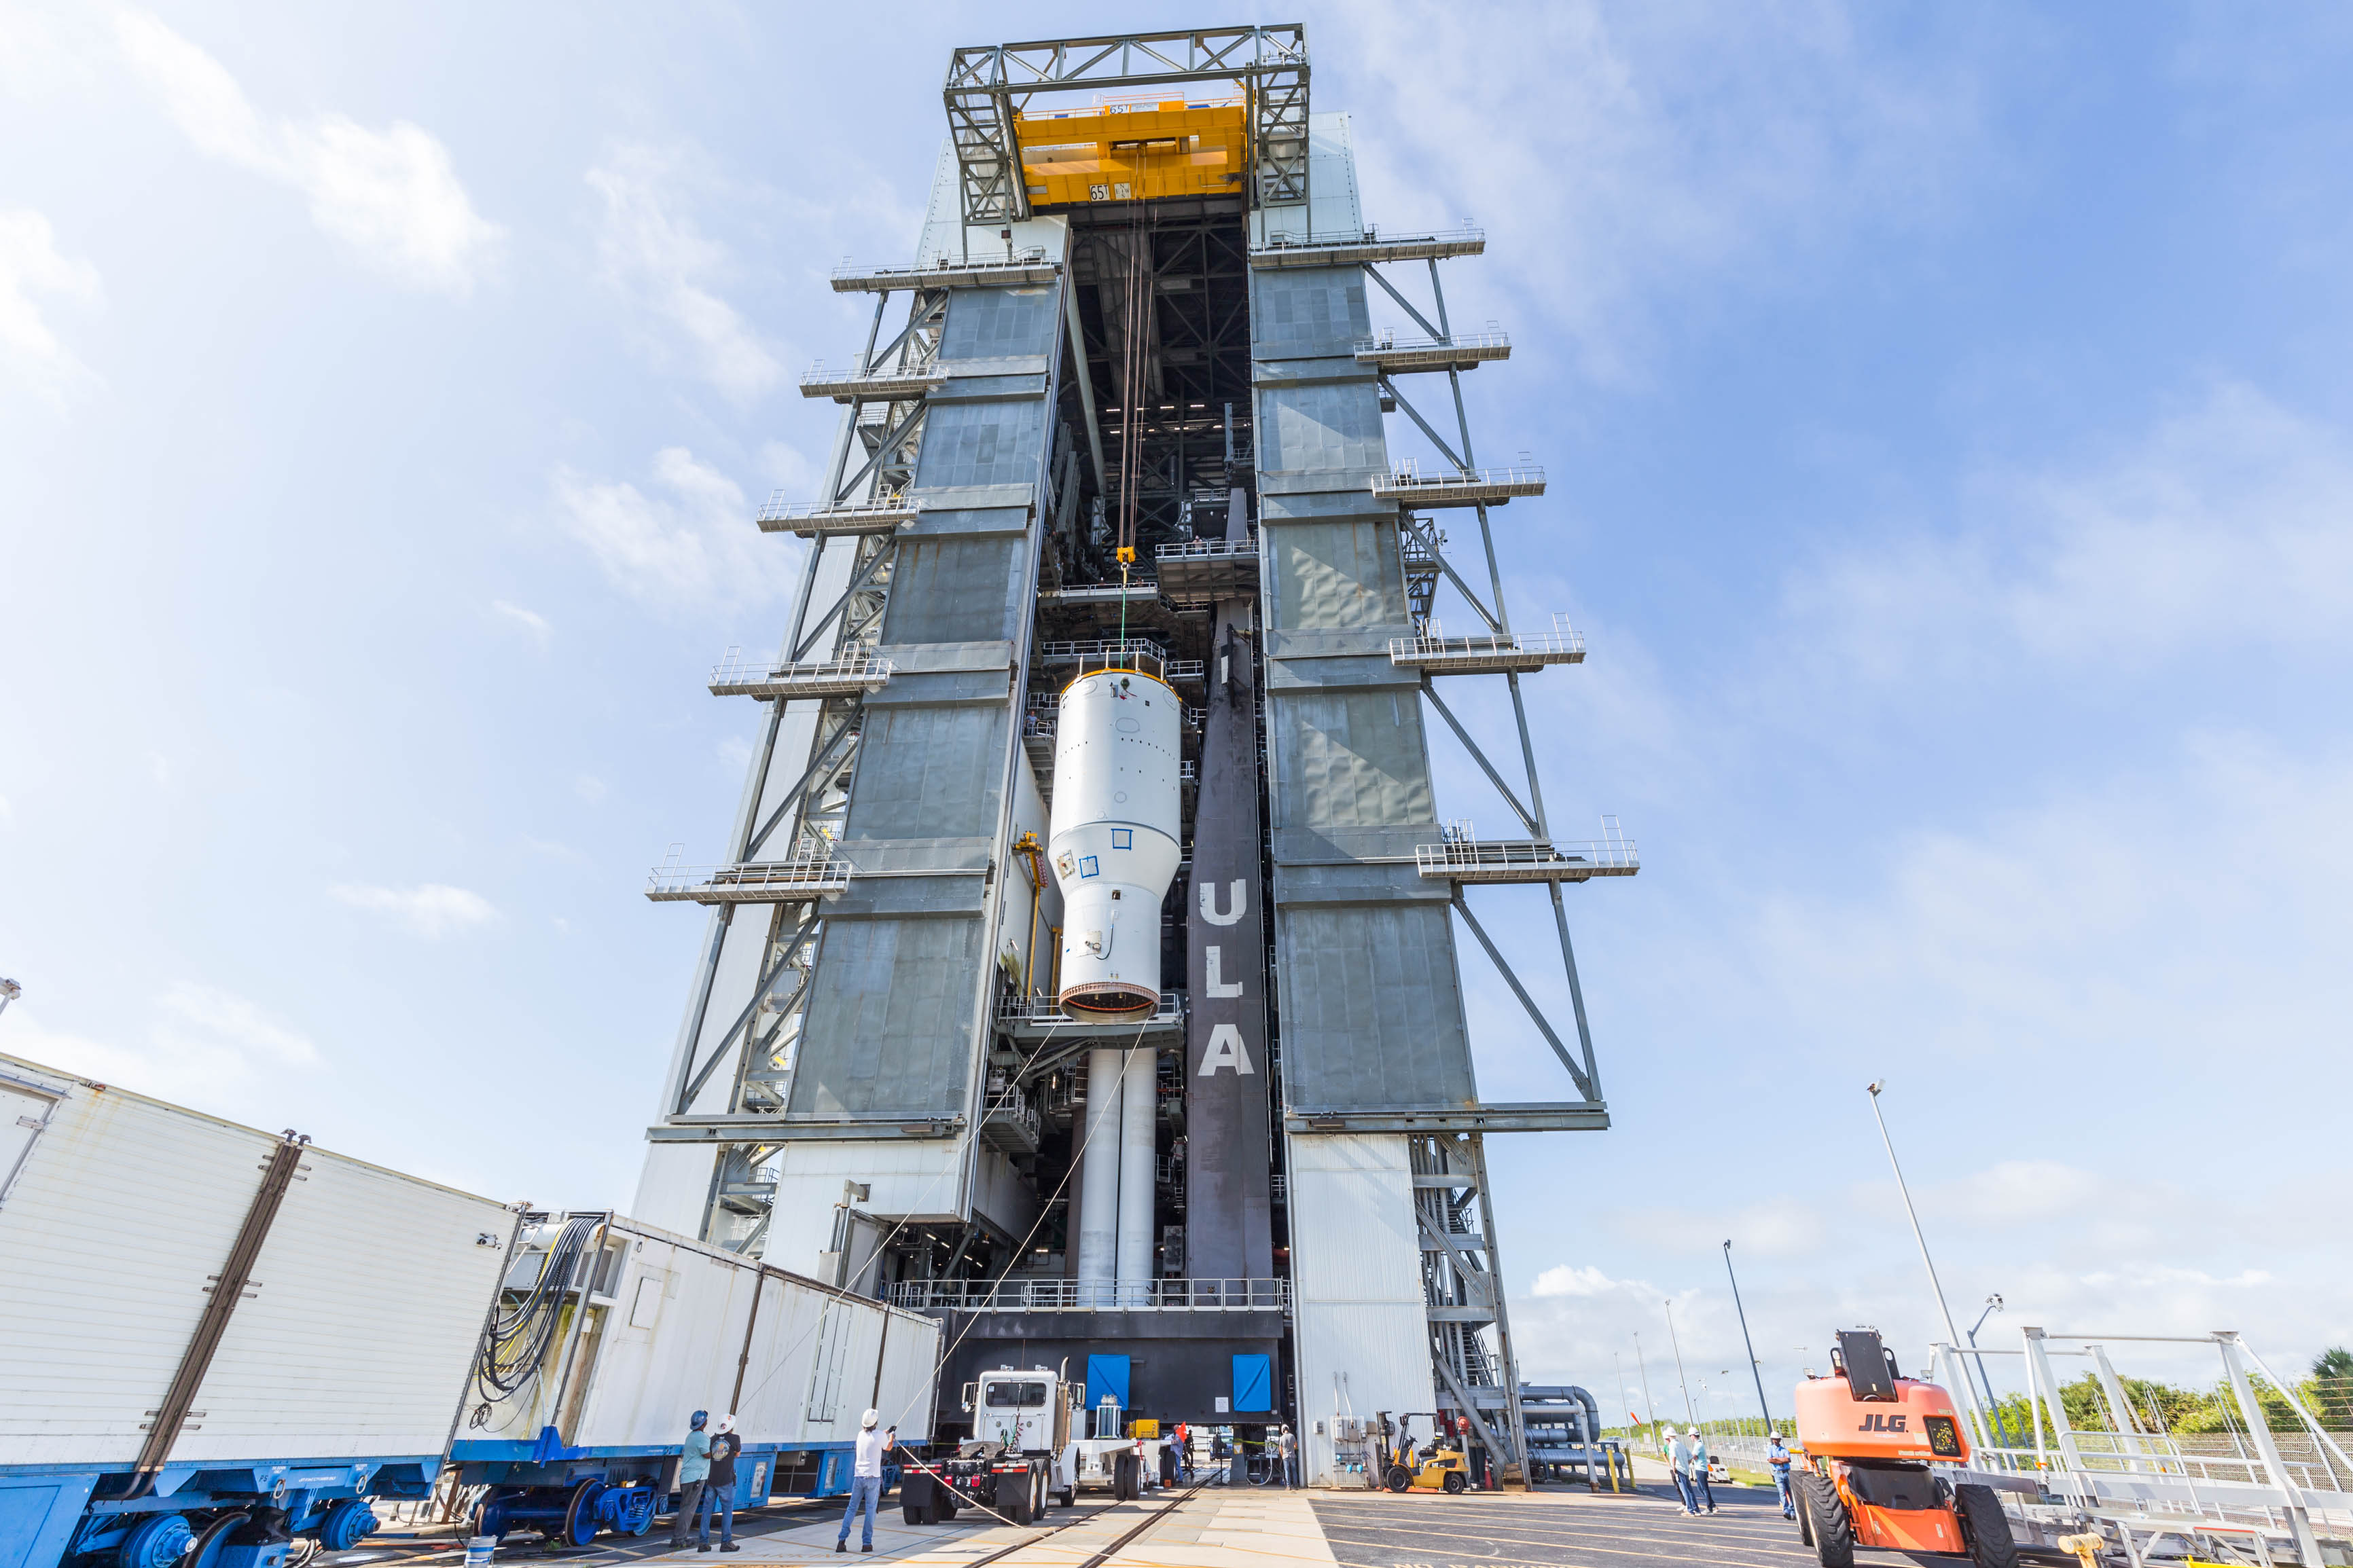 USSF-12: ULA stacks Atlas V rocket for Space Force launch